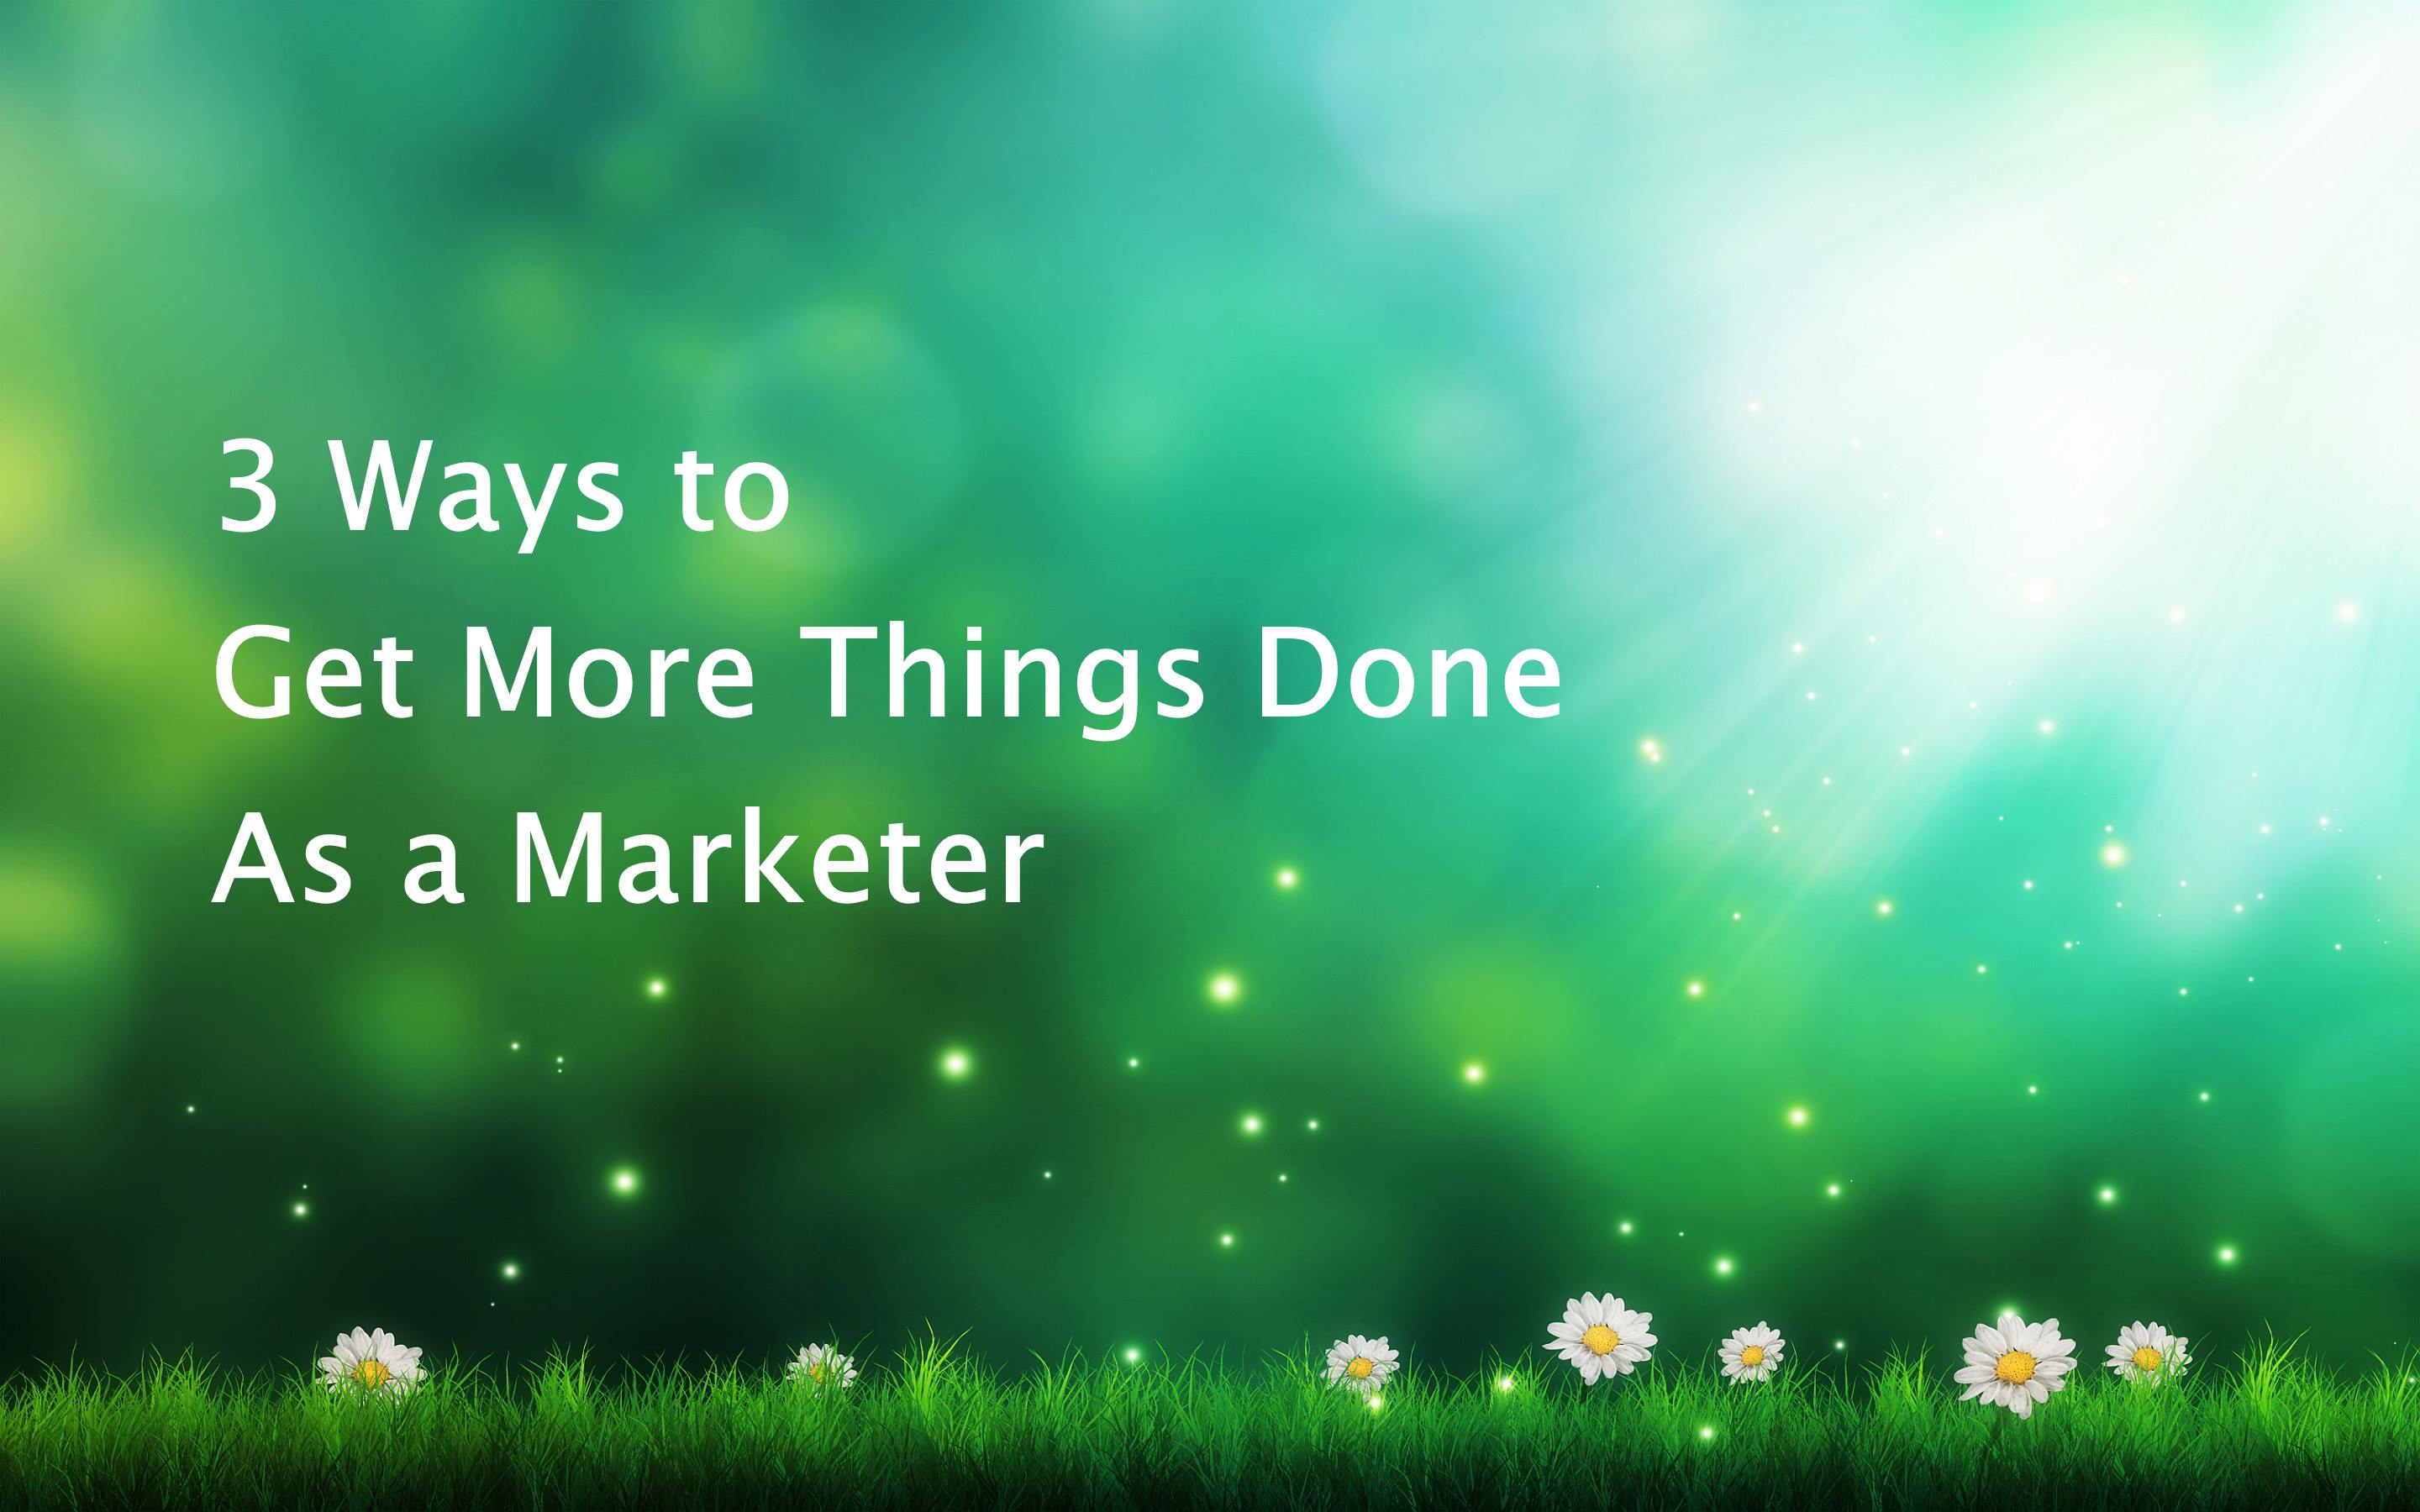 Get Things Done Marketing Image